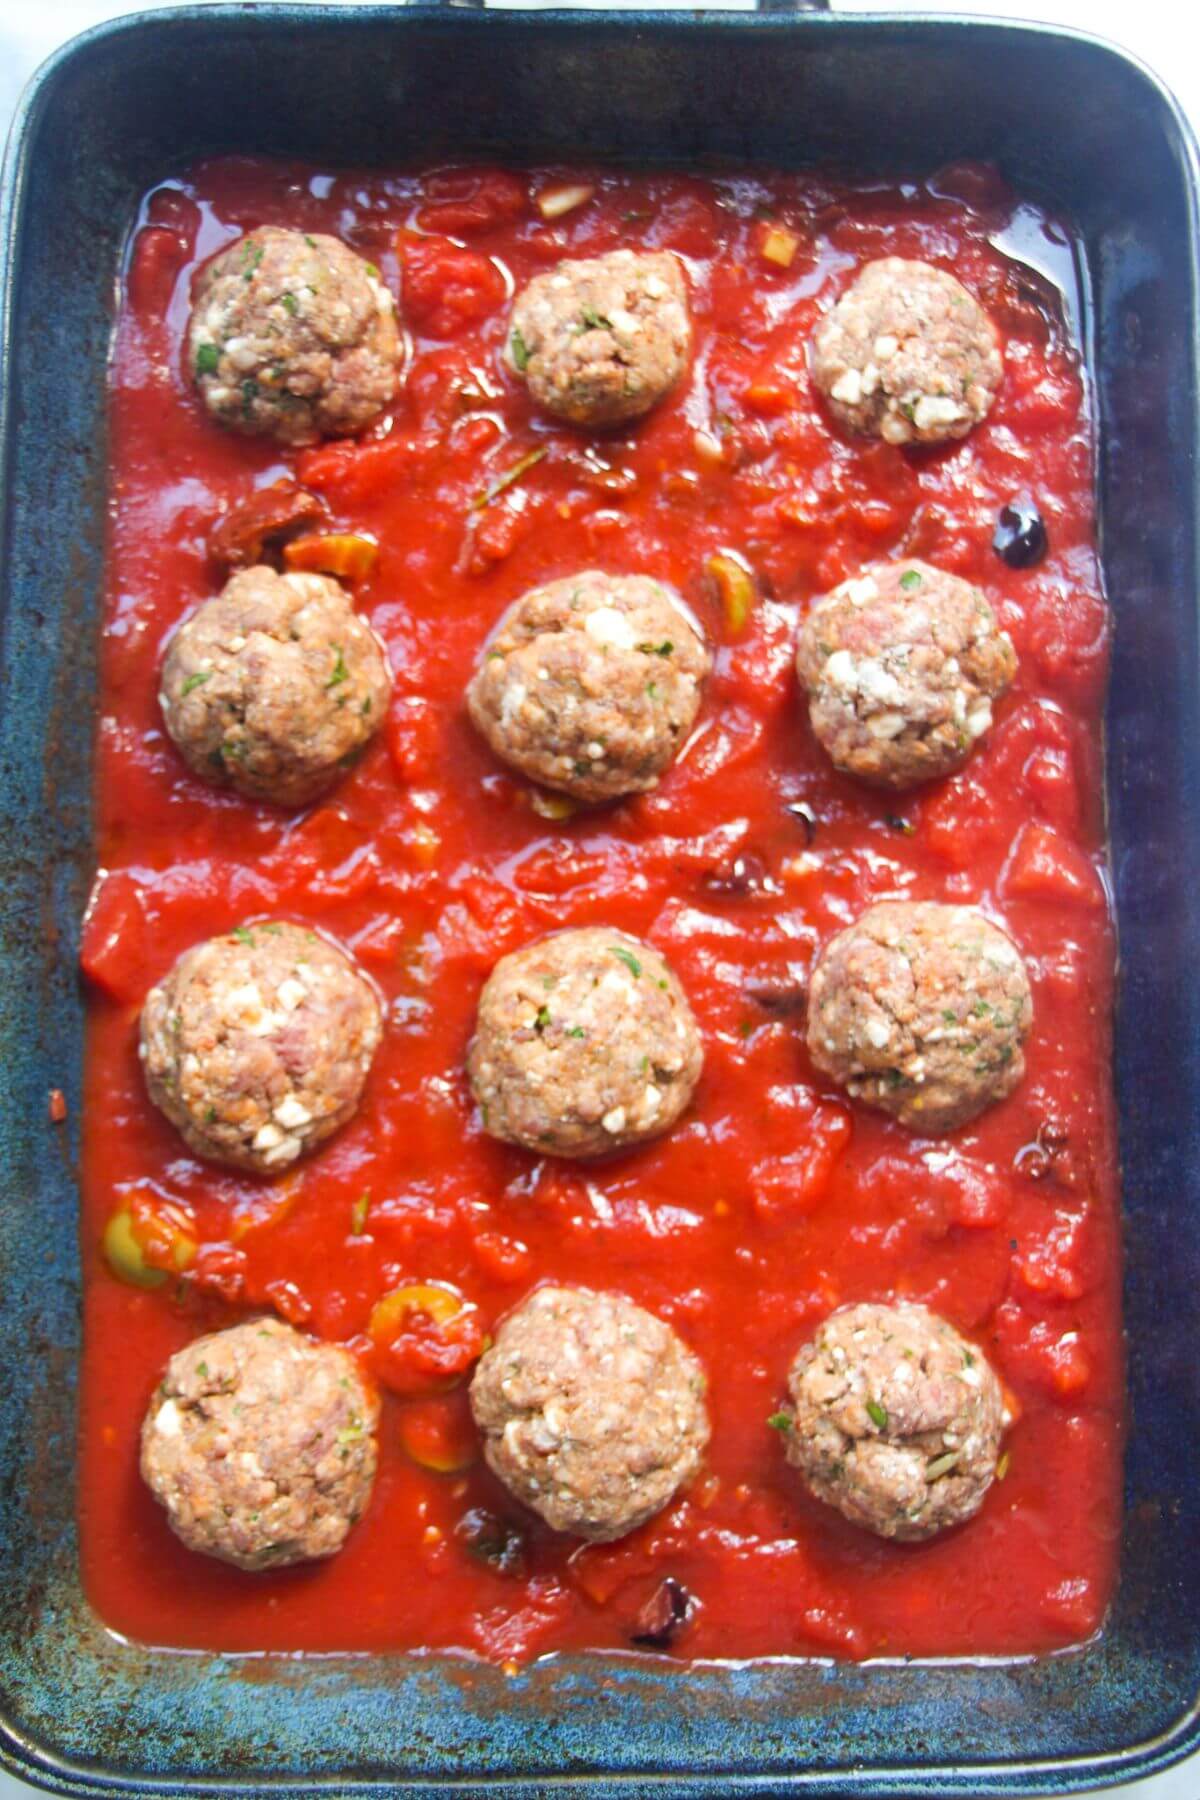 12 uncooked meatballs placed in tomato sauce in a large blue oven dish.